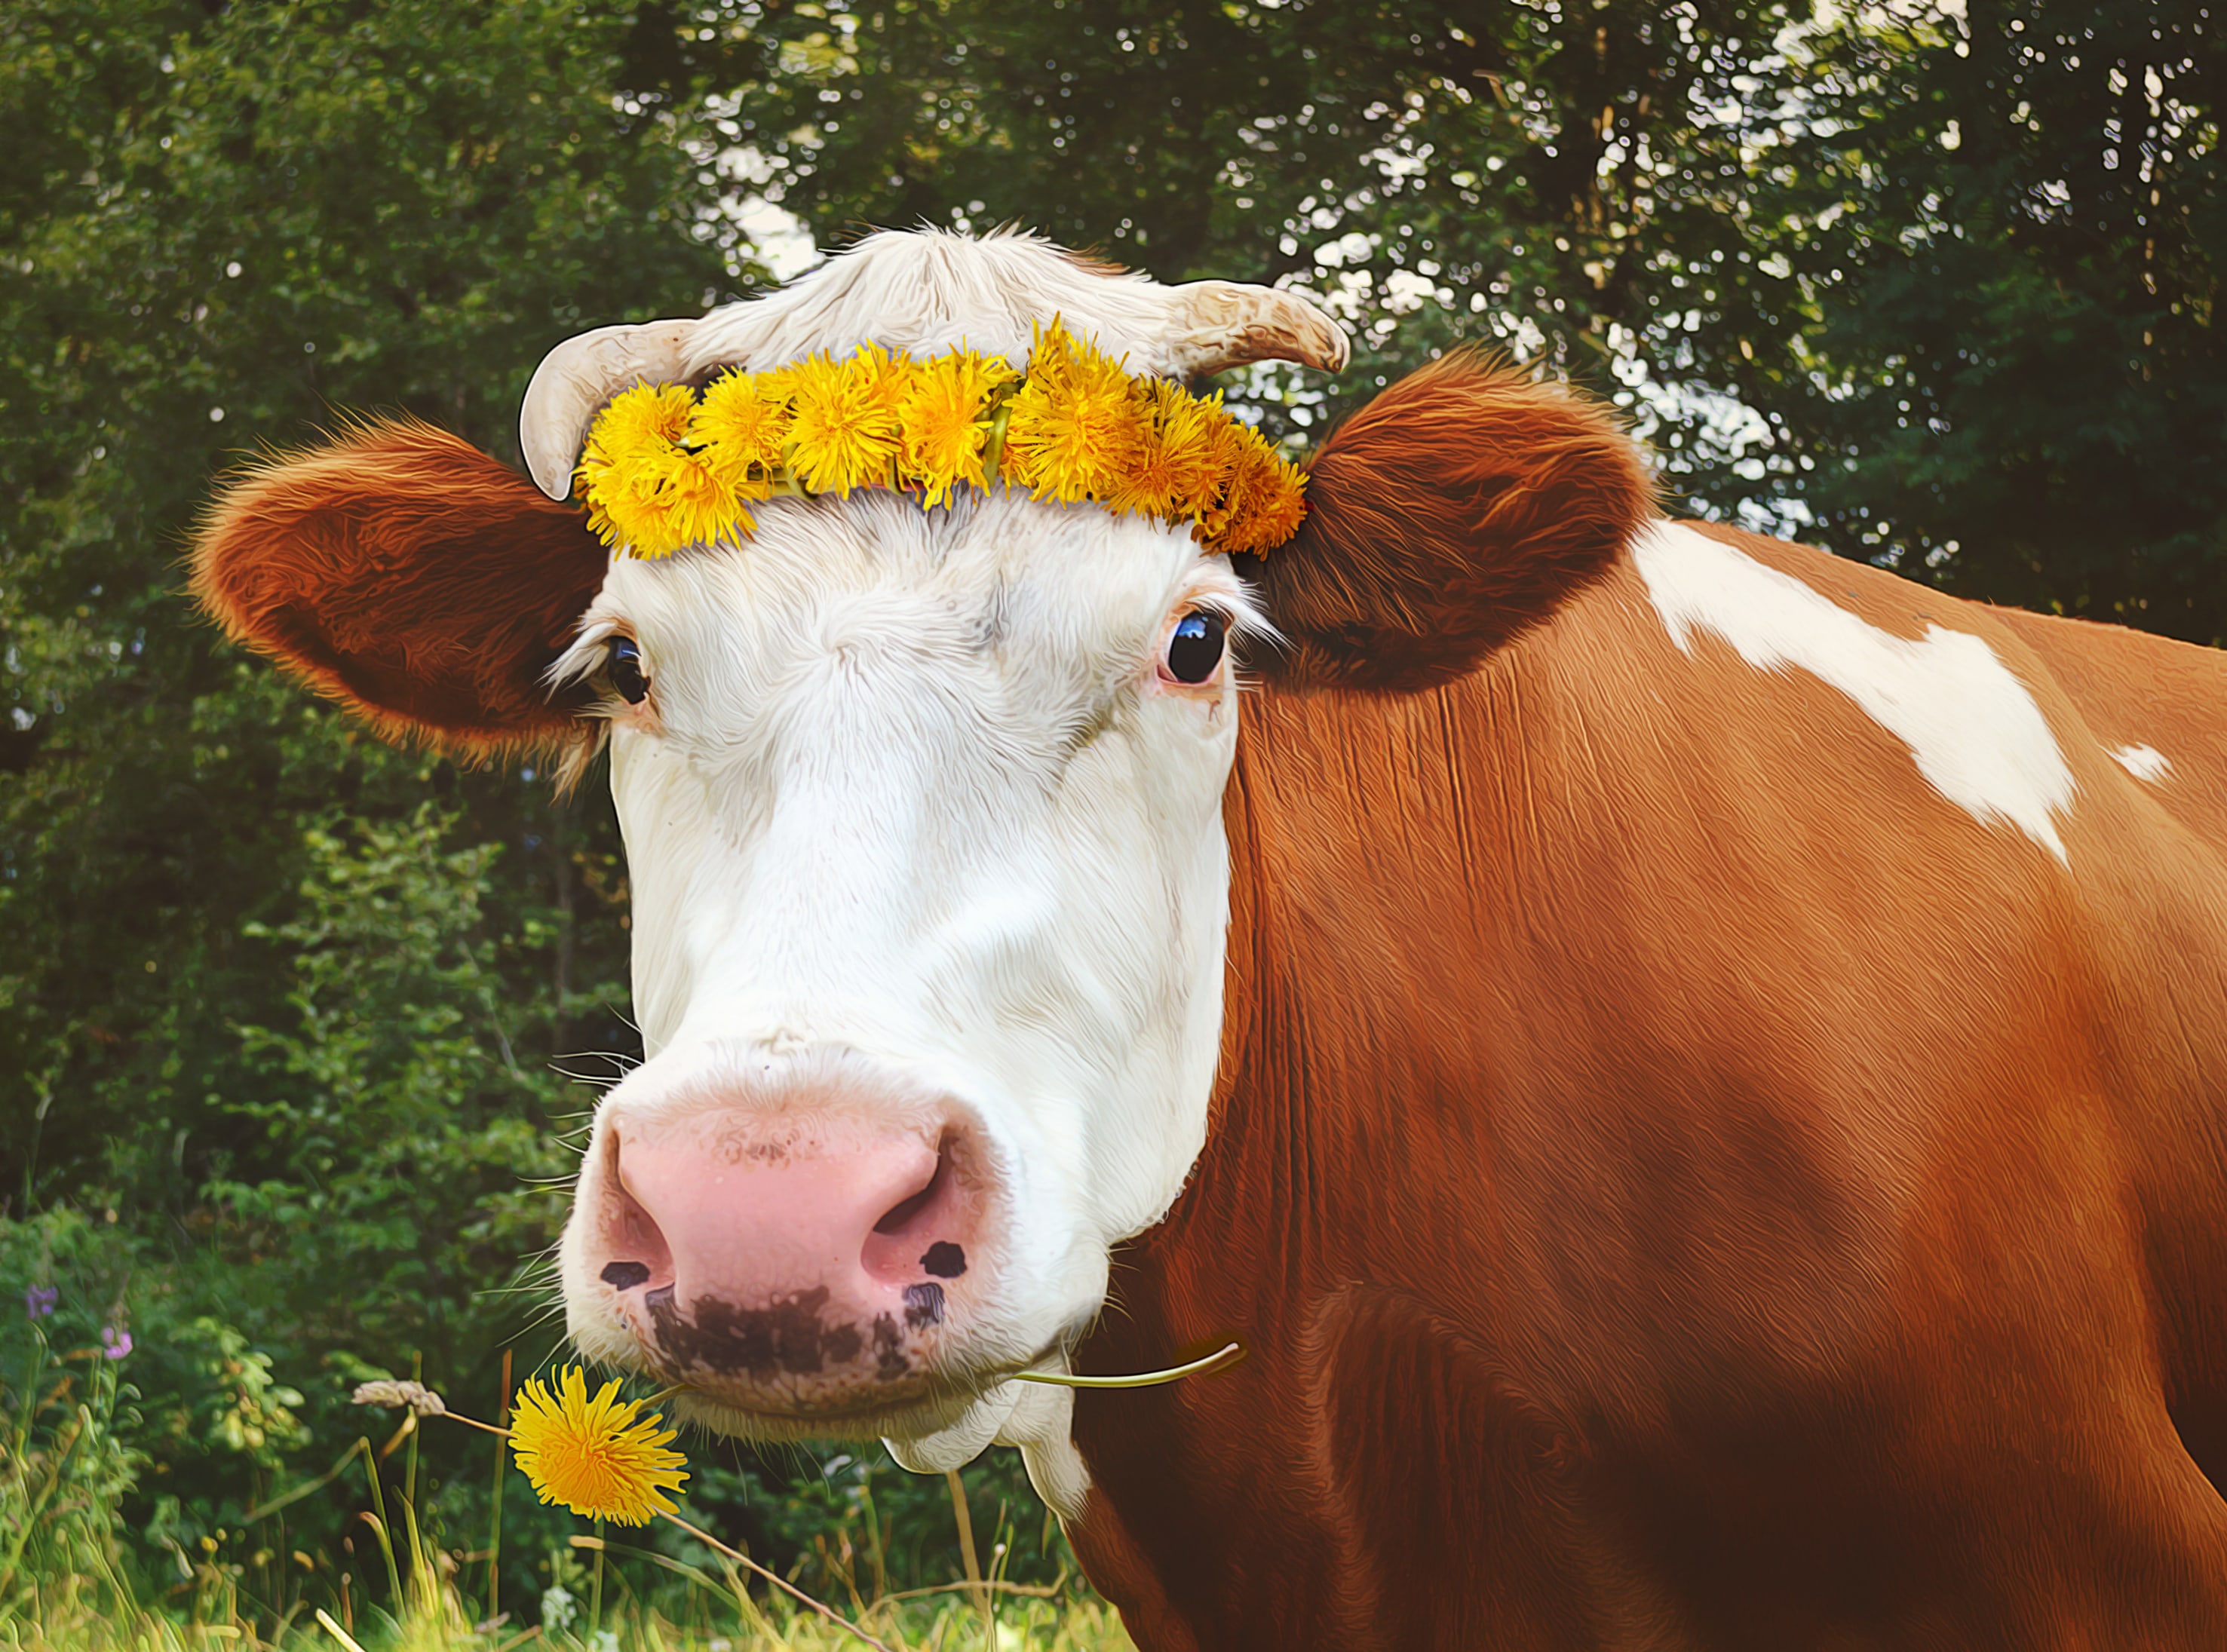 Cow celebrating National Dairy Month with flower crown